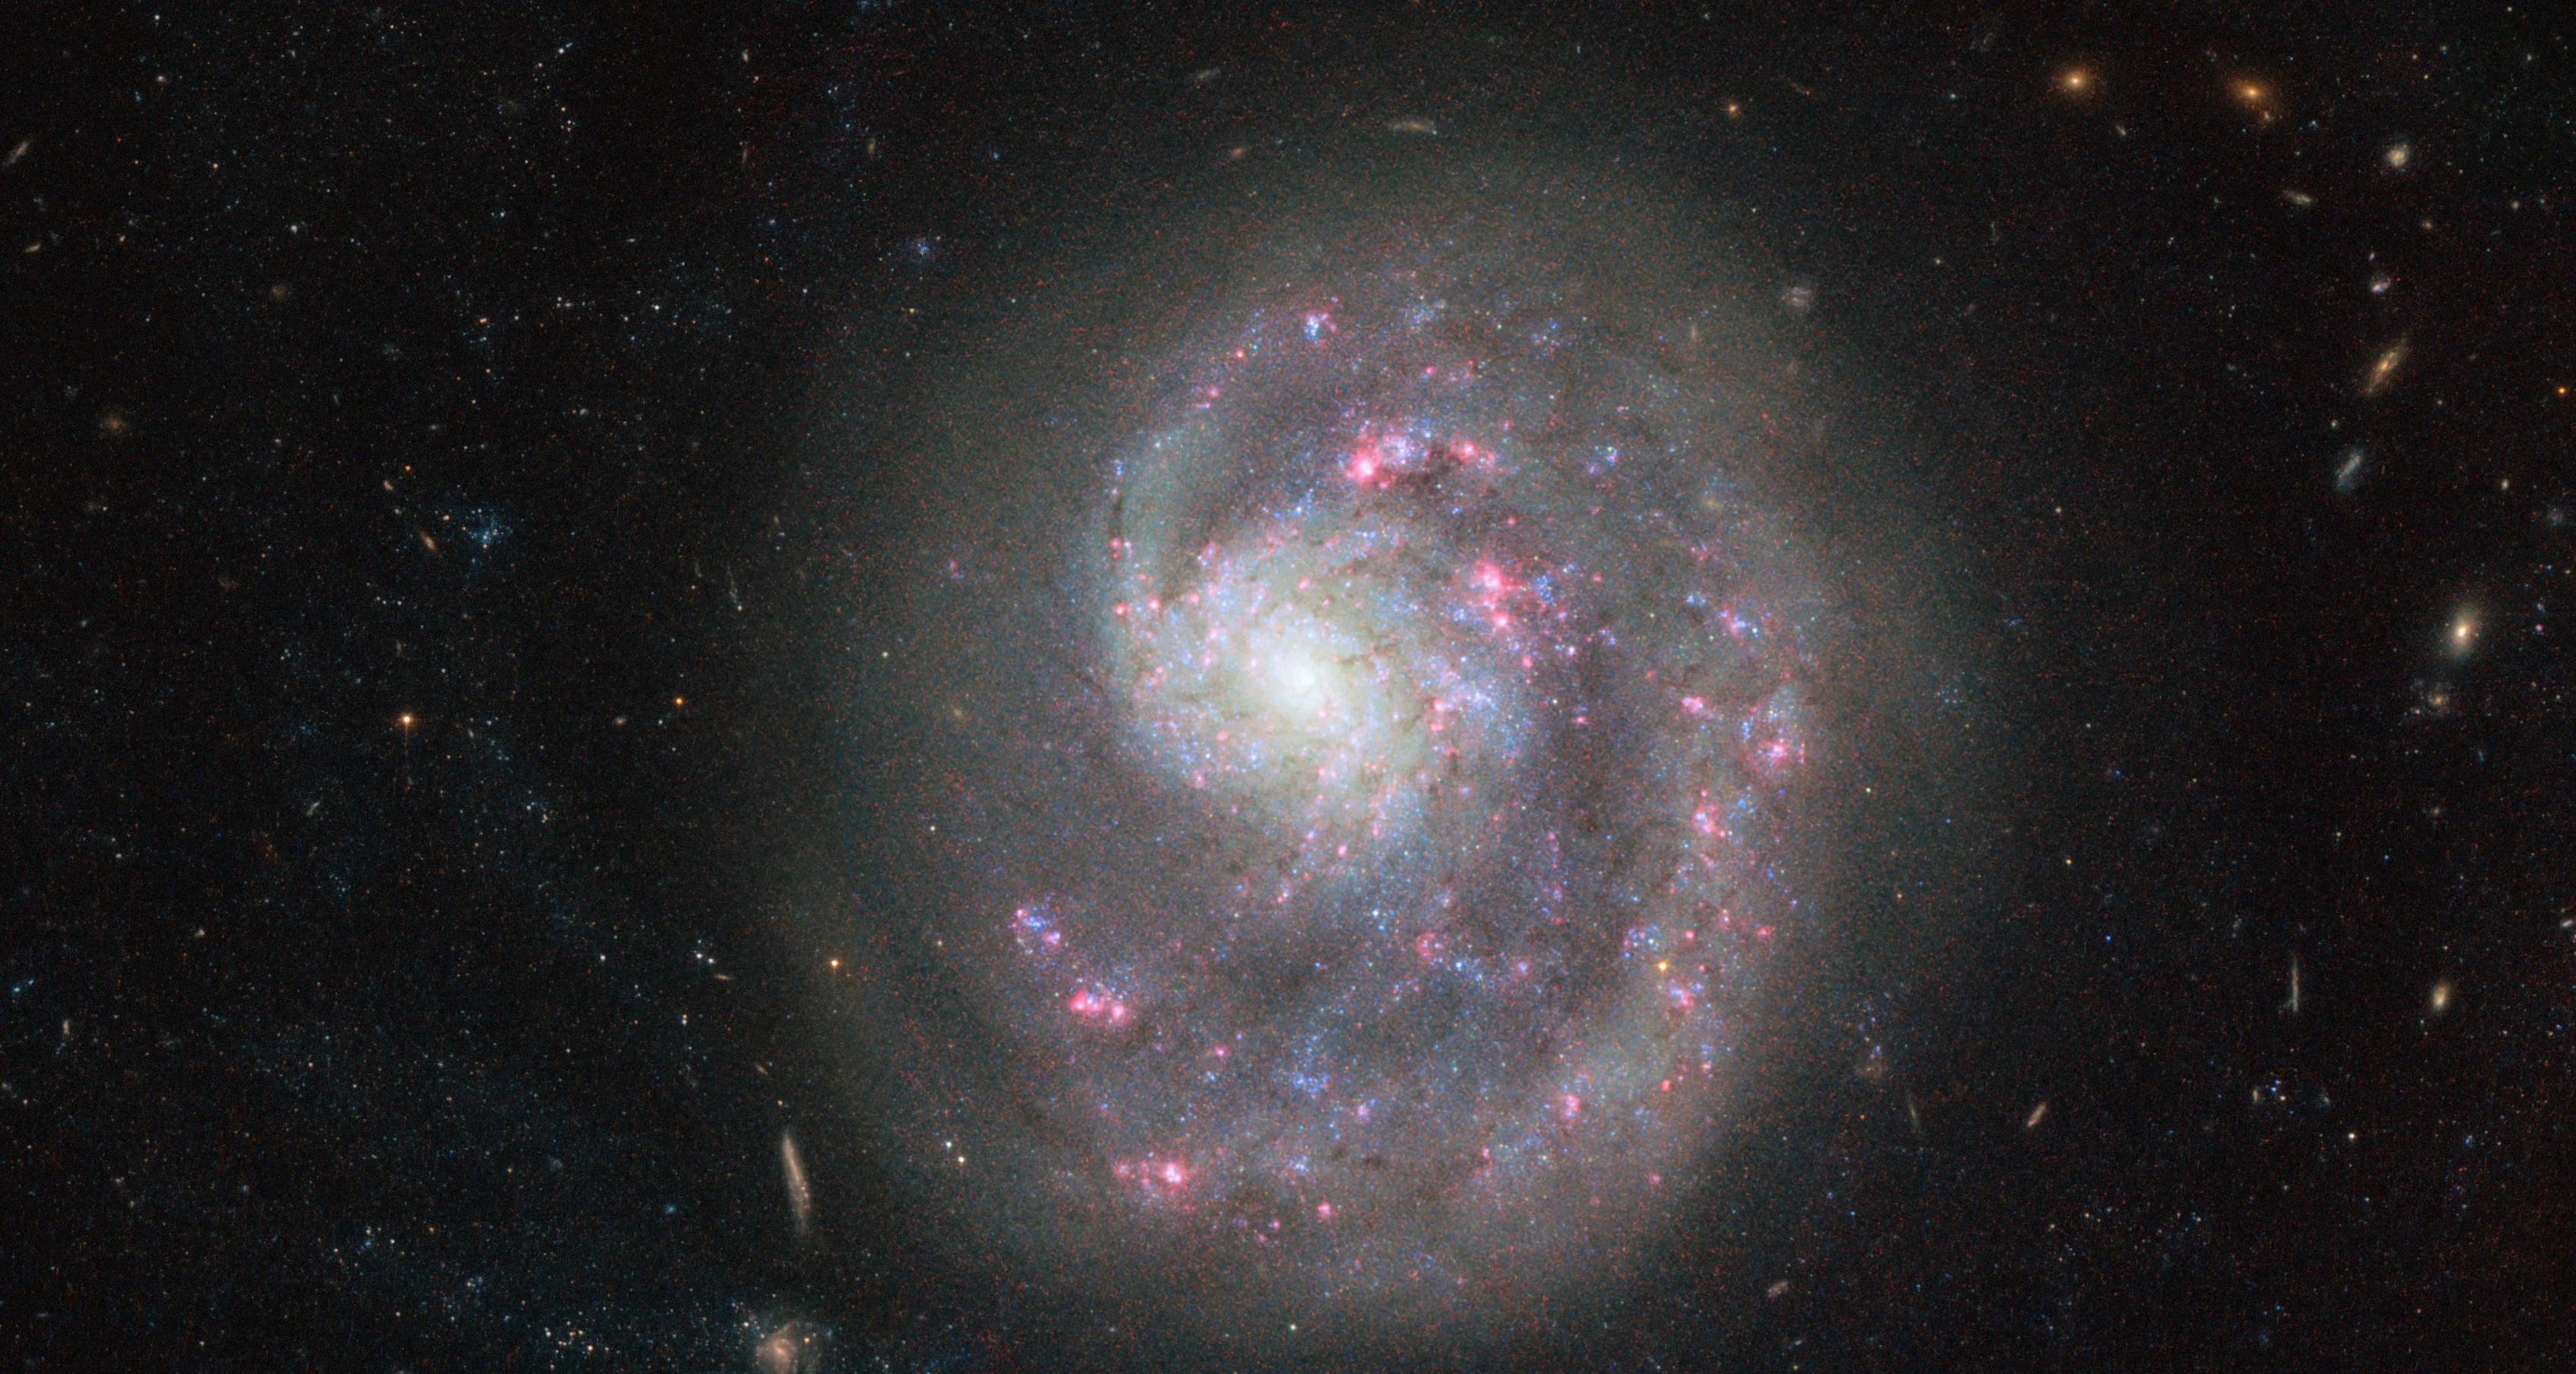 Beautiful full disc spiral galaxy with pink and blue swirls